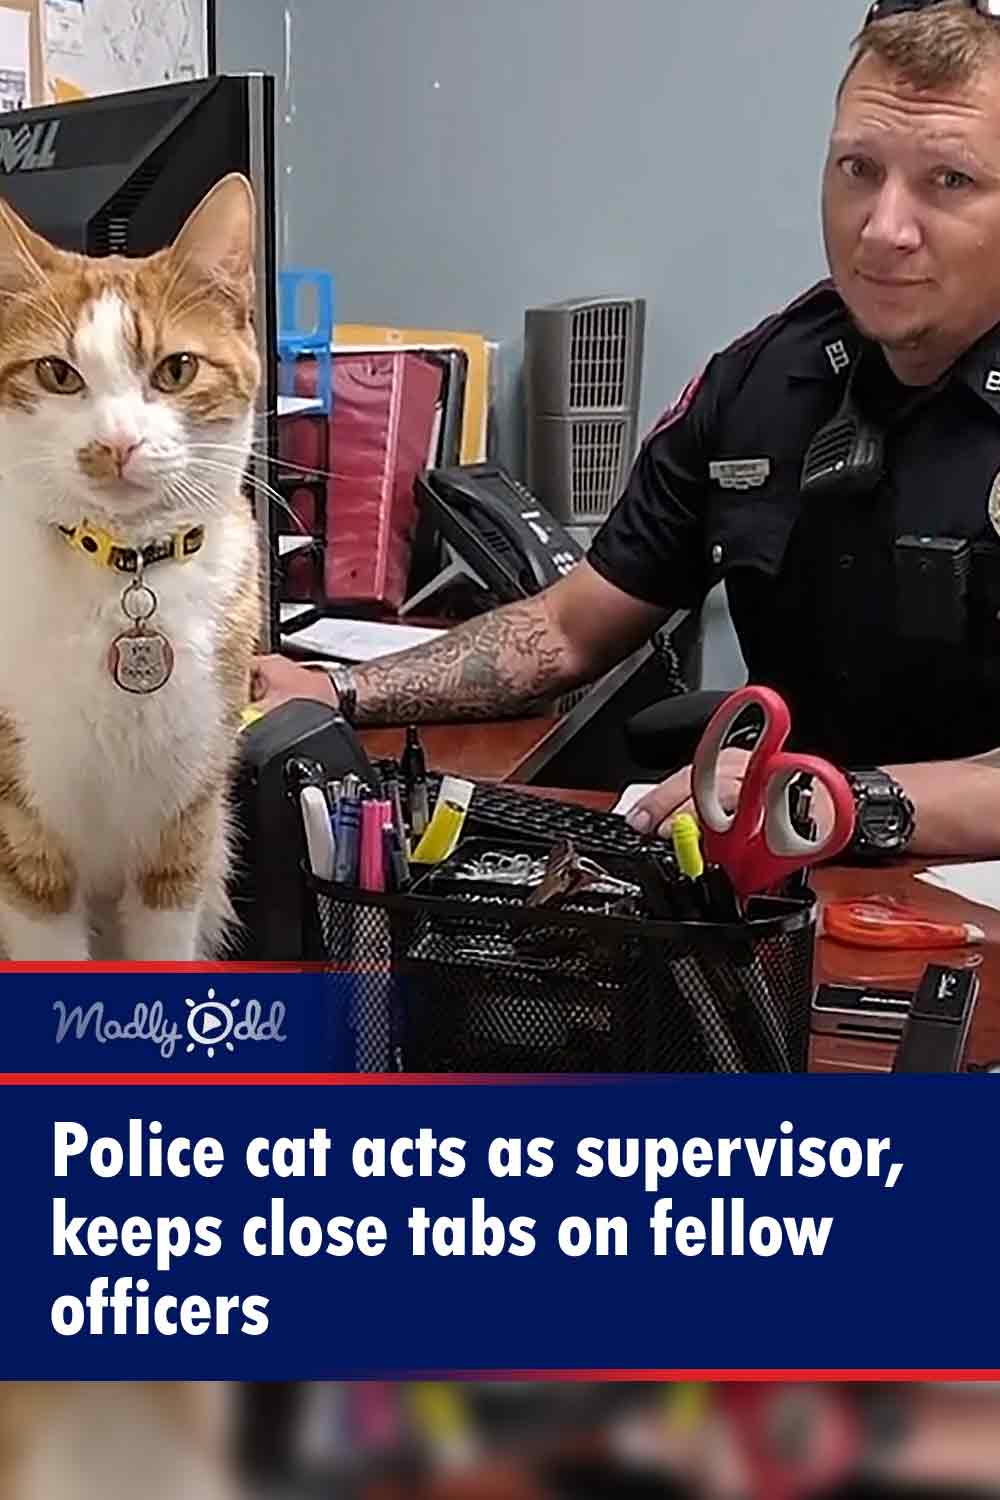 Police cat acts as supervisor, keeps close tabs on fellow officers